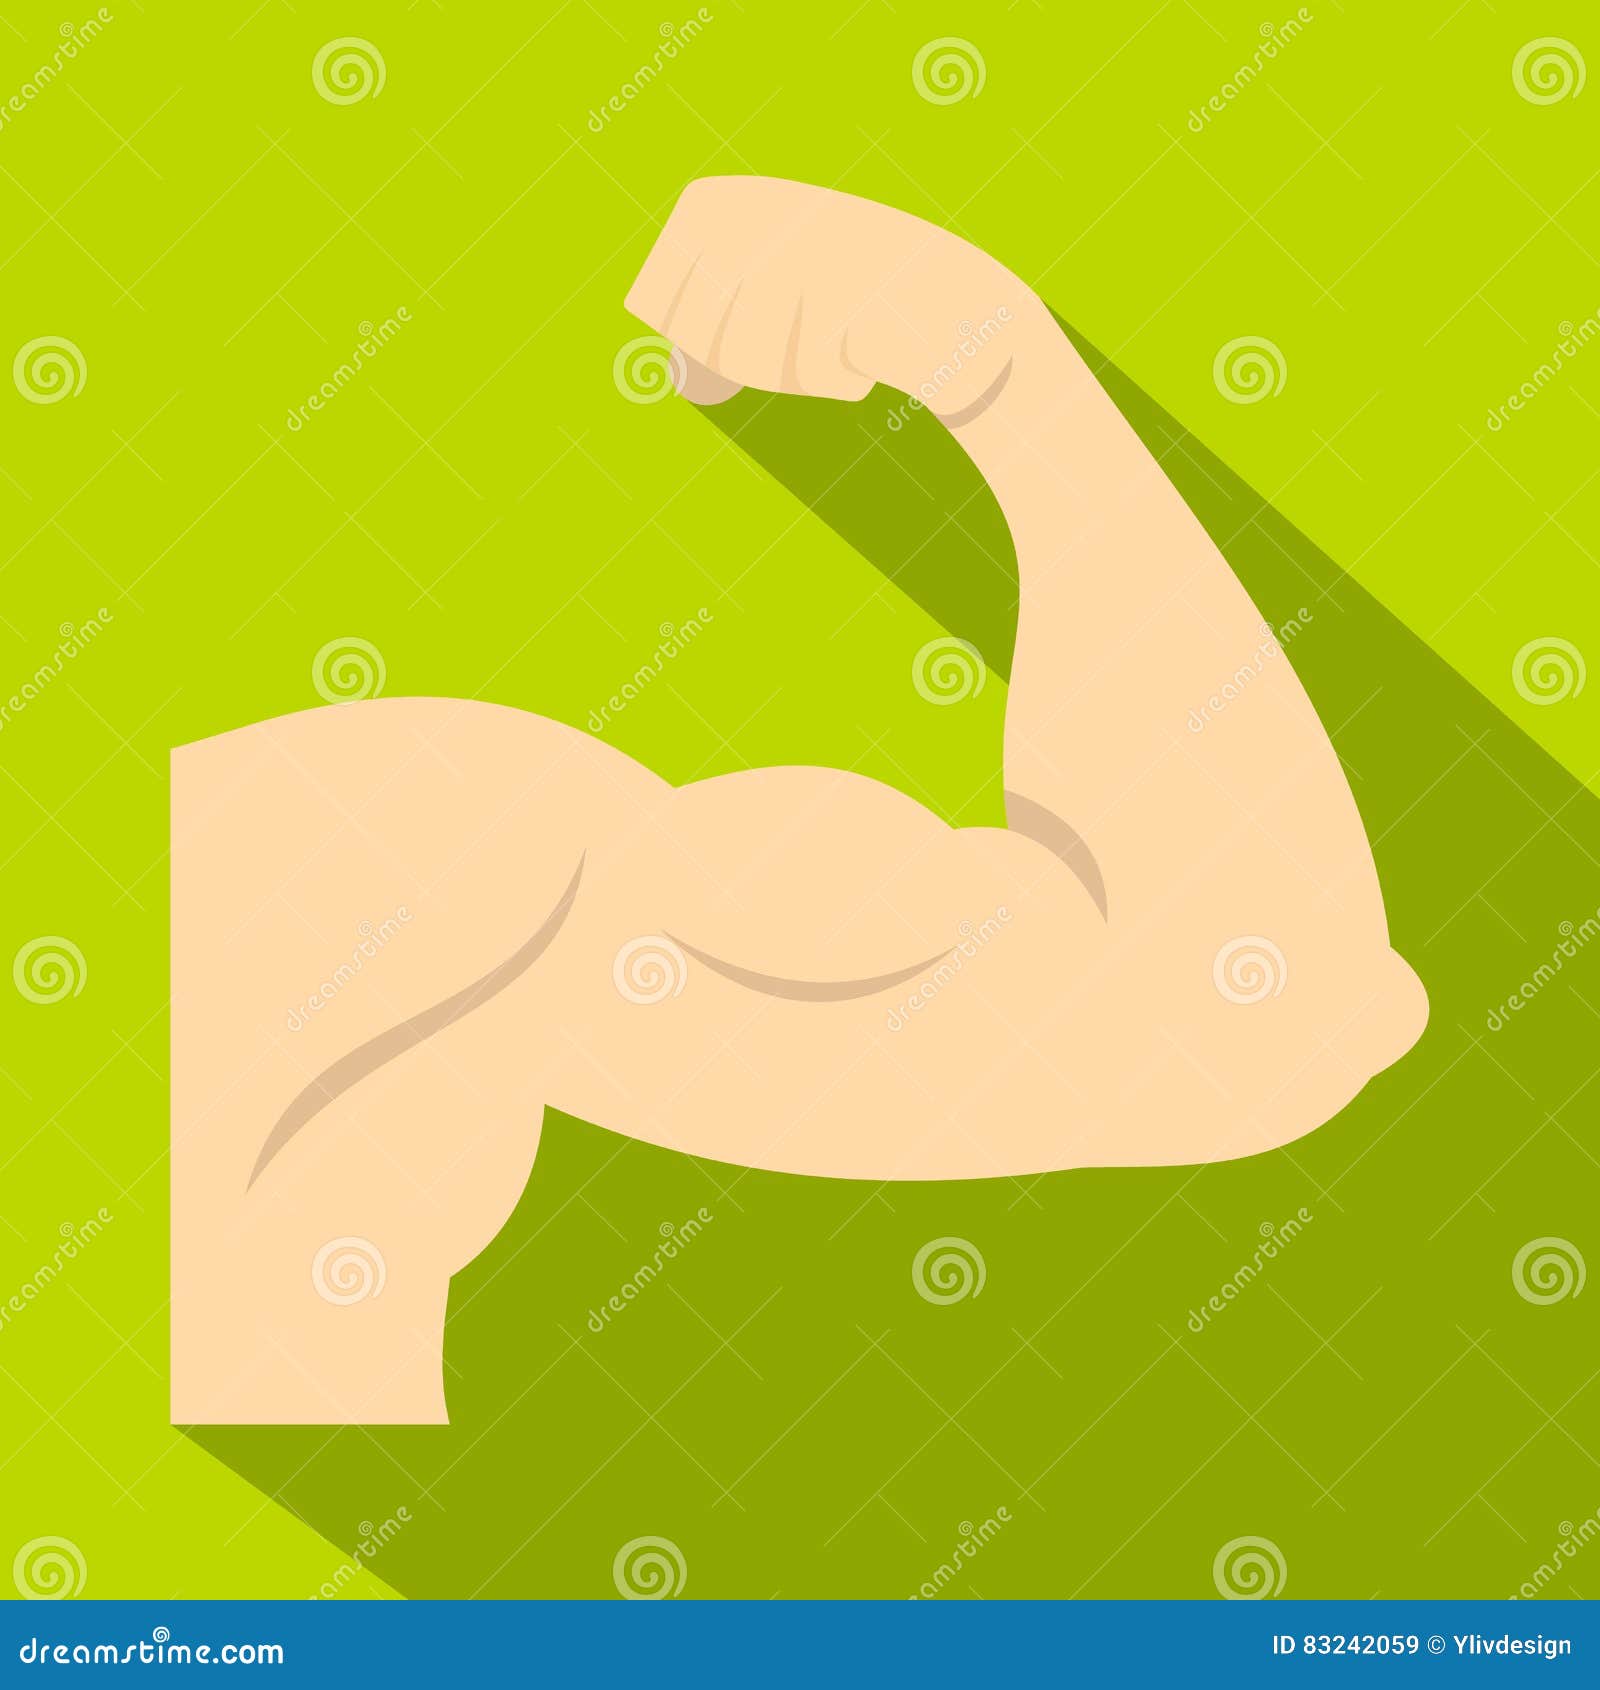 Arm Showing Biceps Muscle Icon, Flat Style Stock Vector - Illustration ...